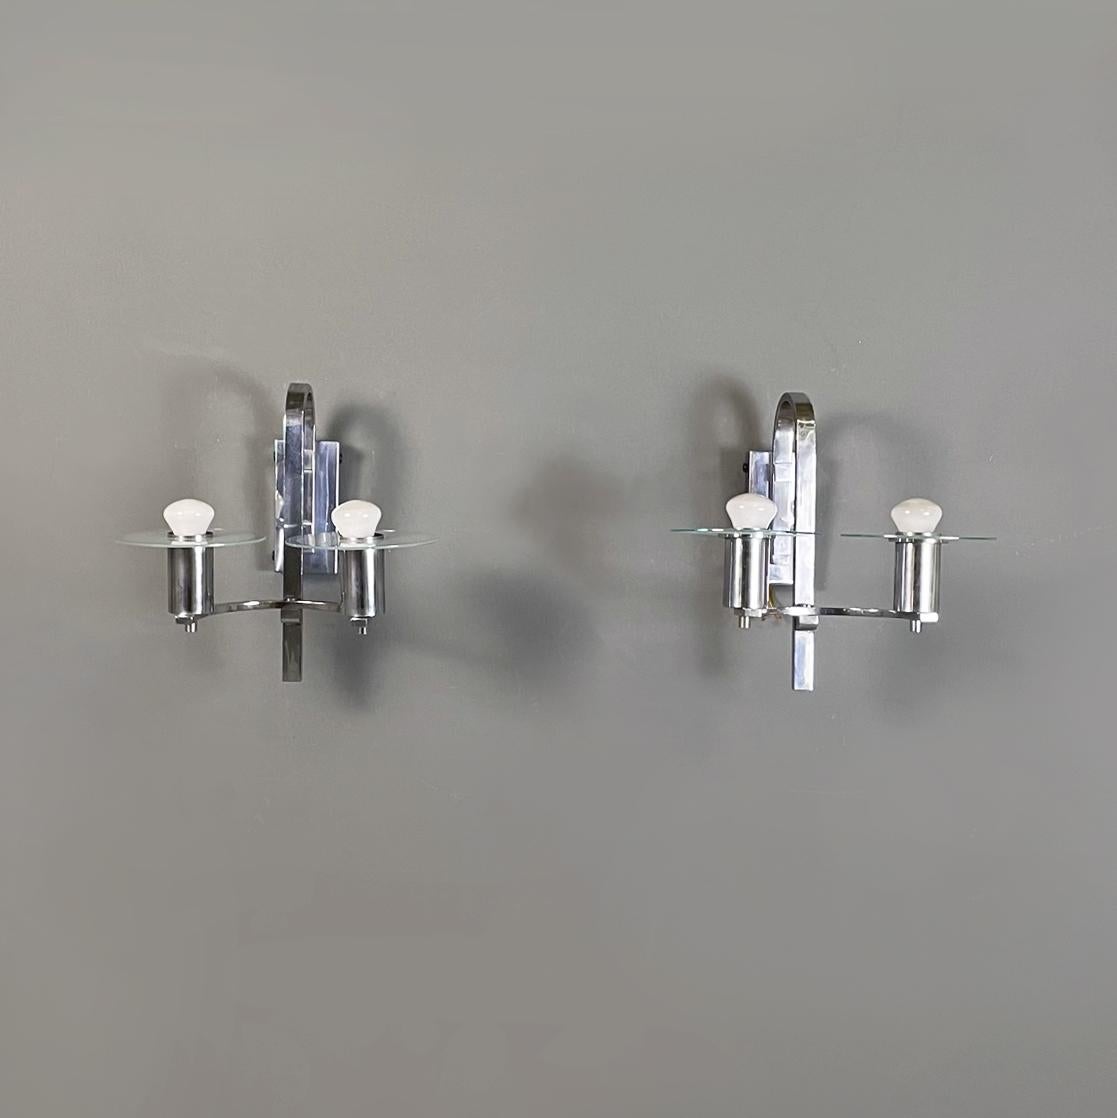 Austrian Art Deco Double light sconces in metal and glass, 1920s
Pair of double light sconces in metal and glass. The chromed metal structure is made up of two curved arms with a rectangular section, on which the two cylindrical diffusers rest. In